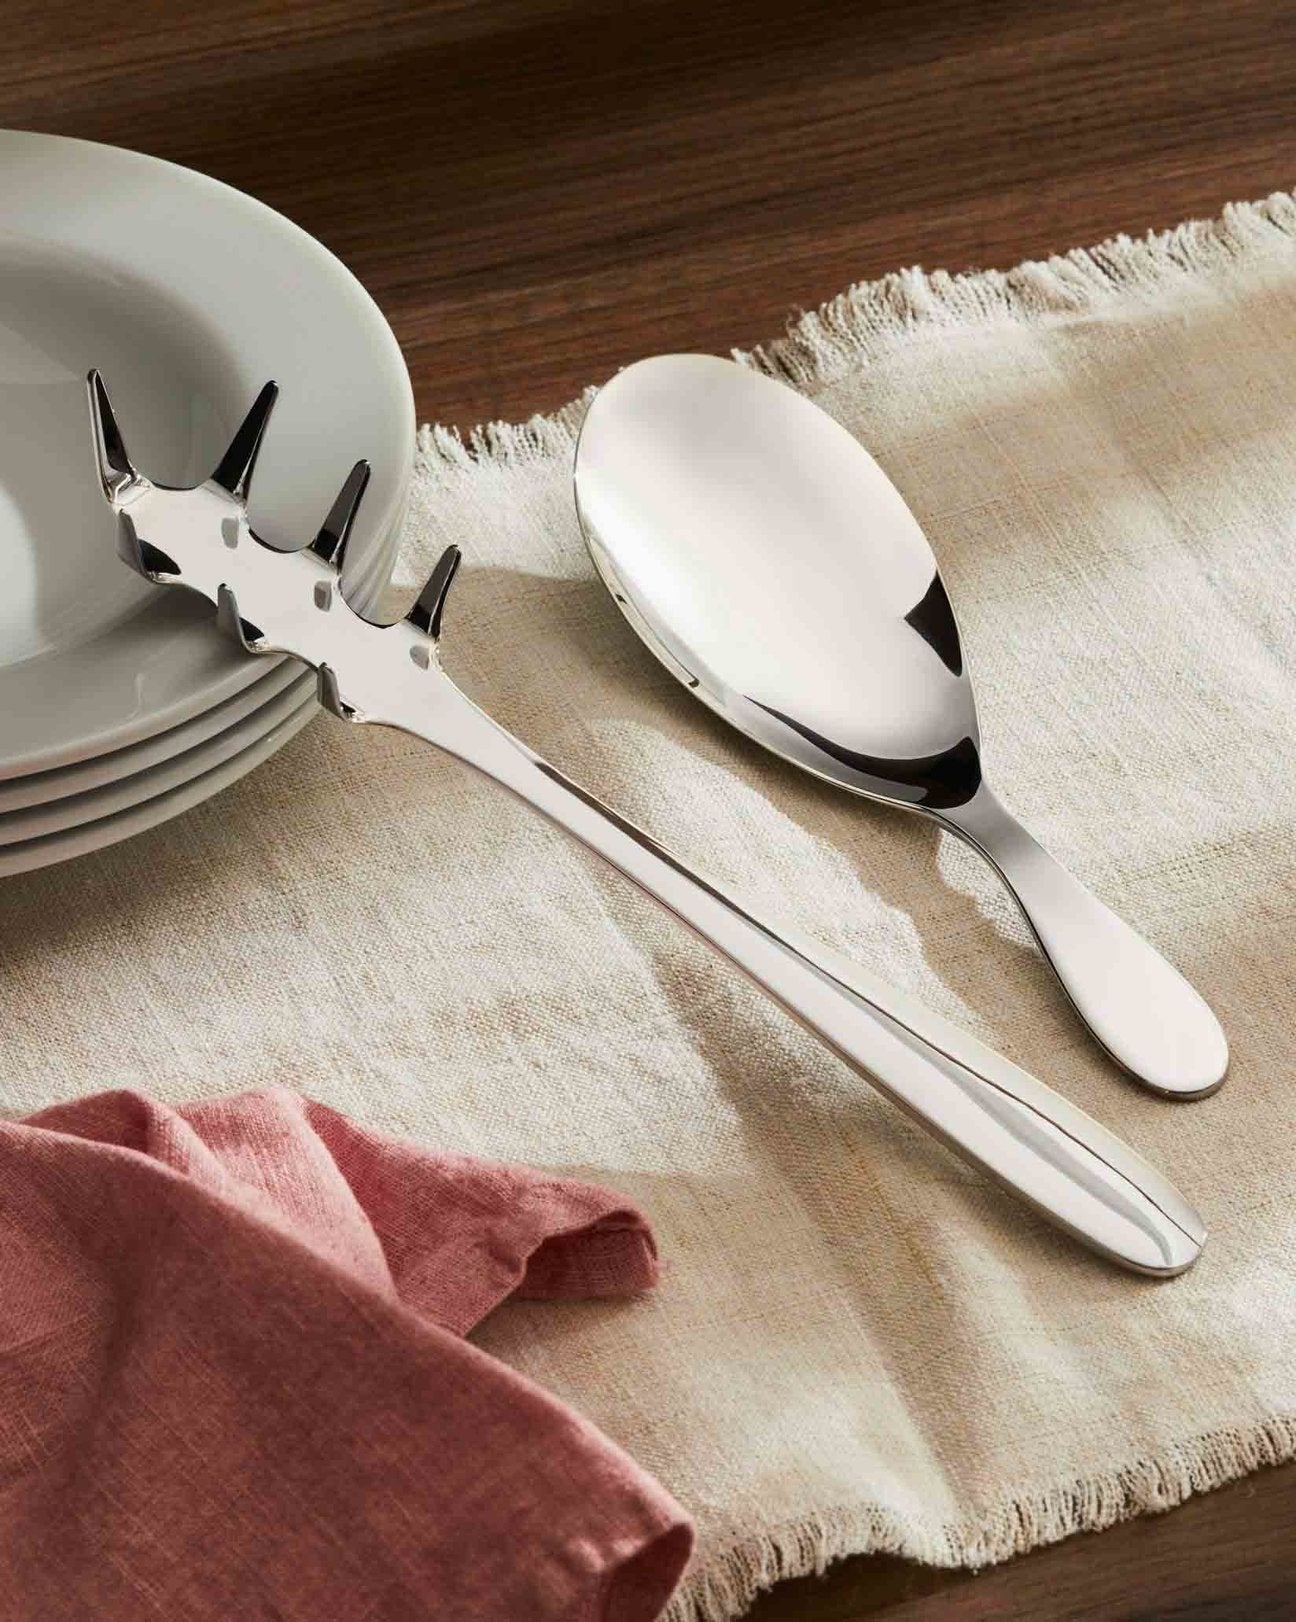 Alessi eat.it Risotto Serving Spoon | Panik Design